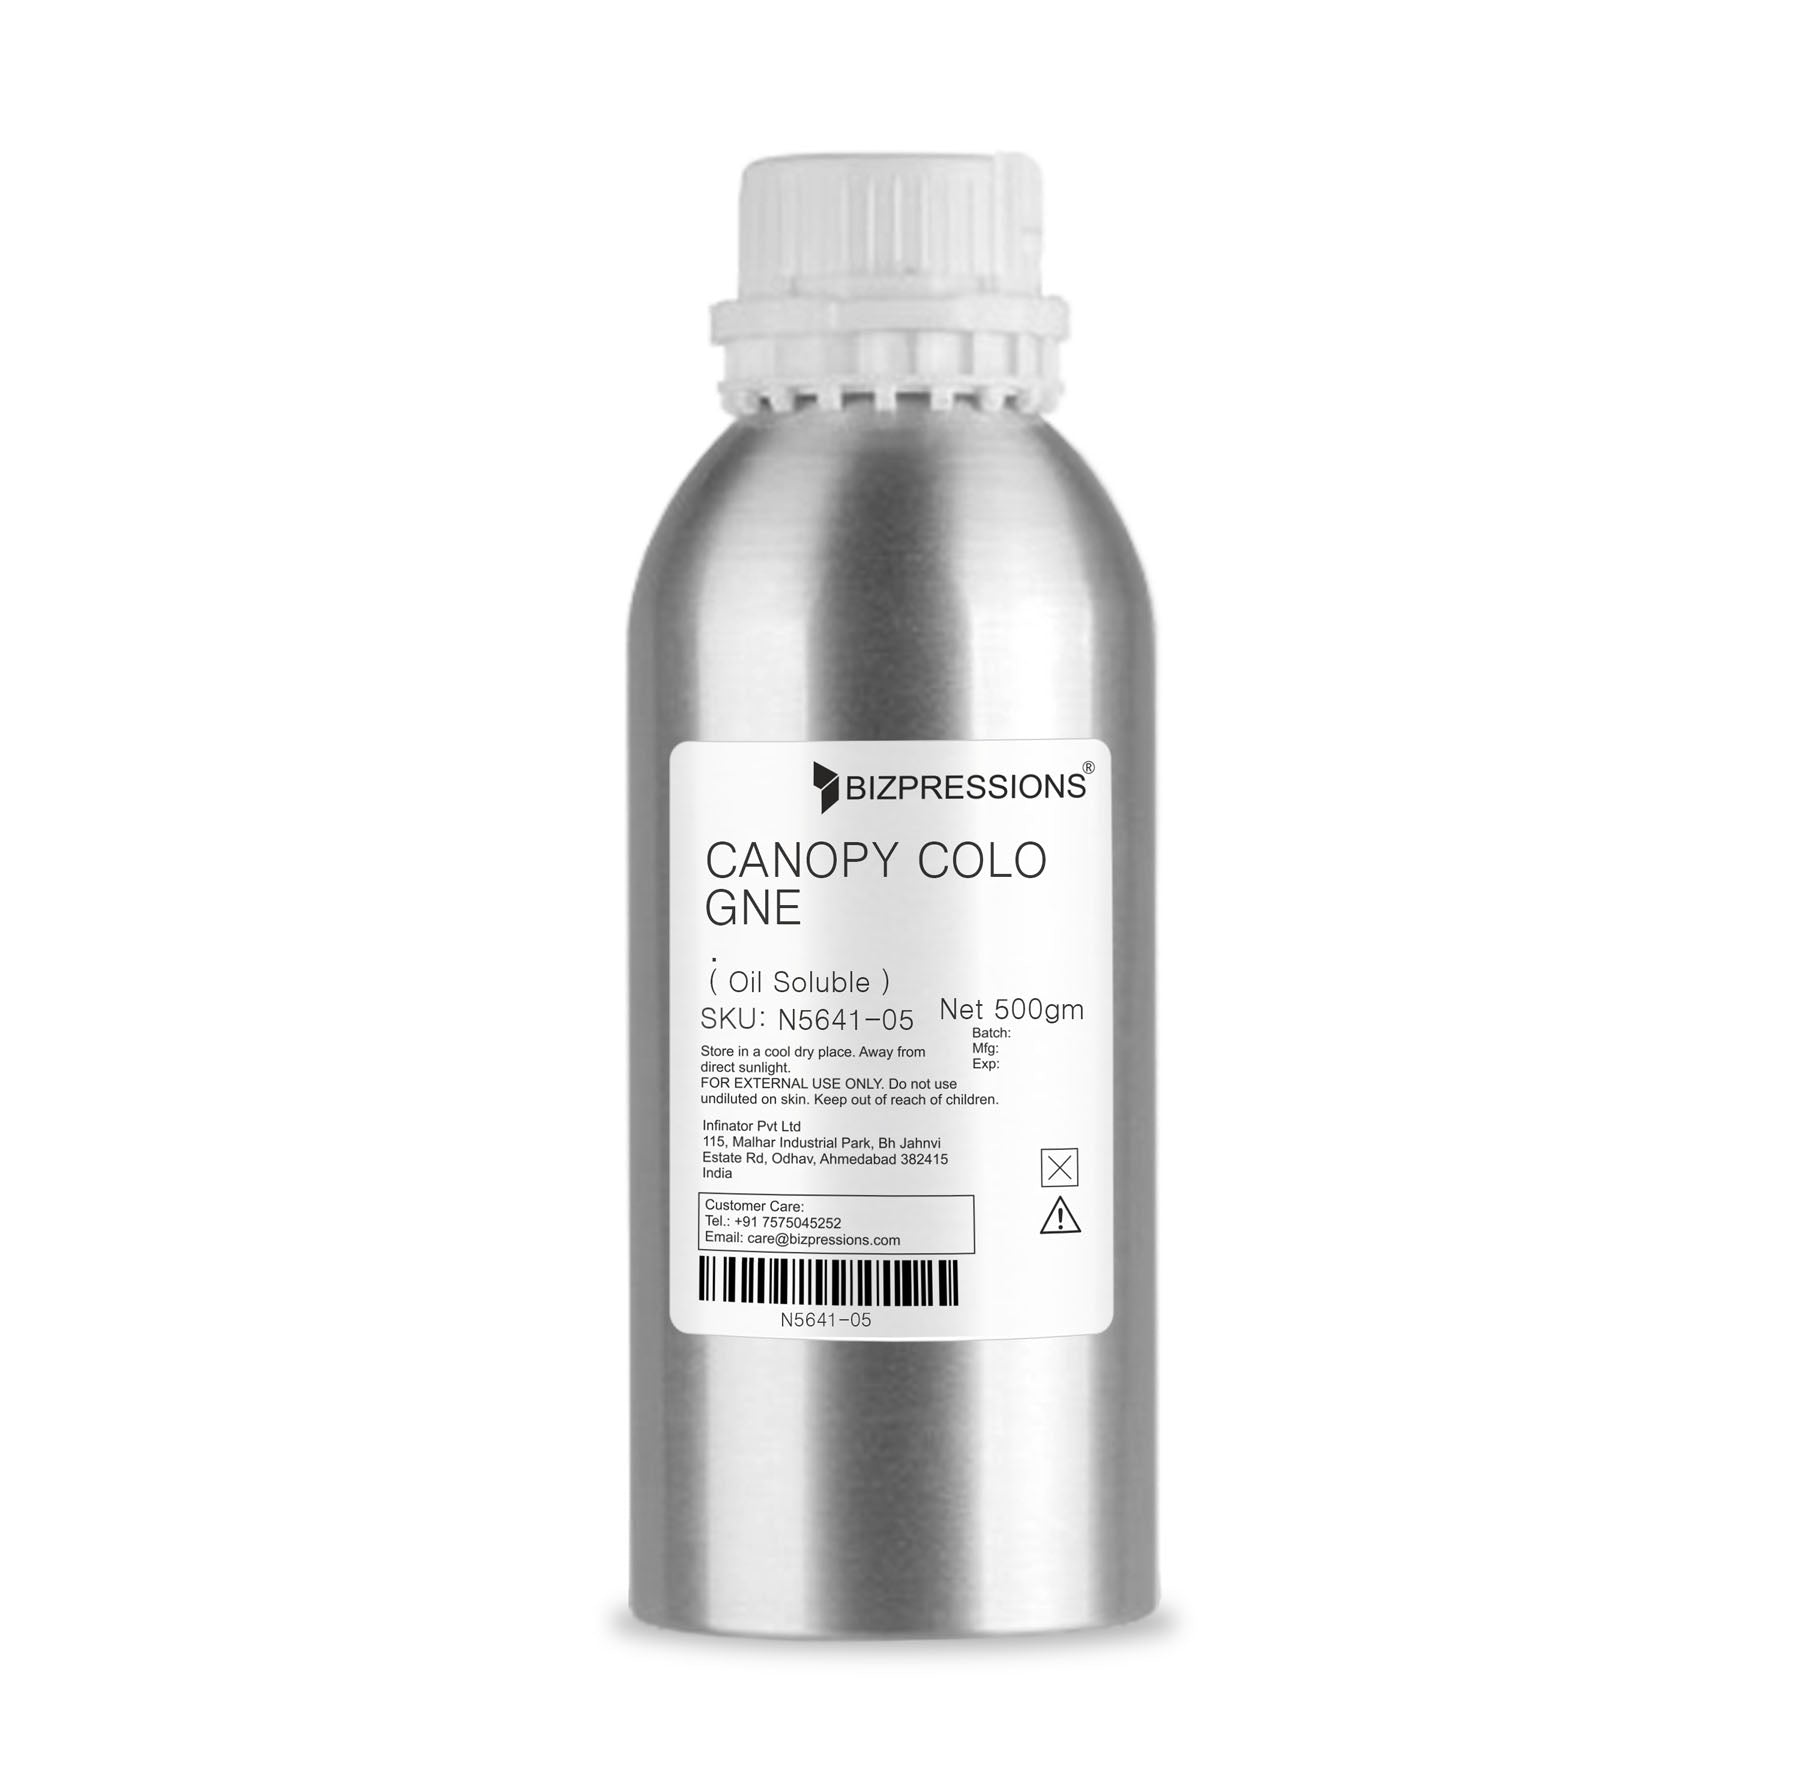 CANOPY COLOGNE - Fragrance ( Oil Soluble ) - 500 gm